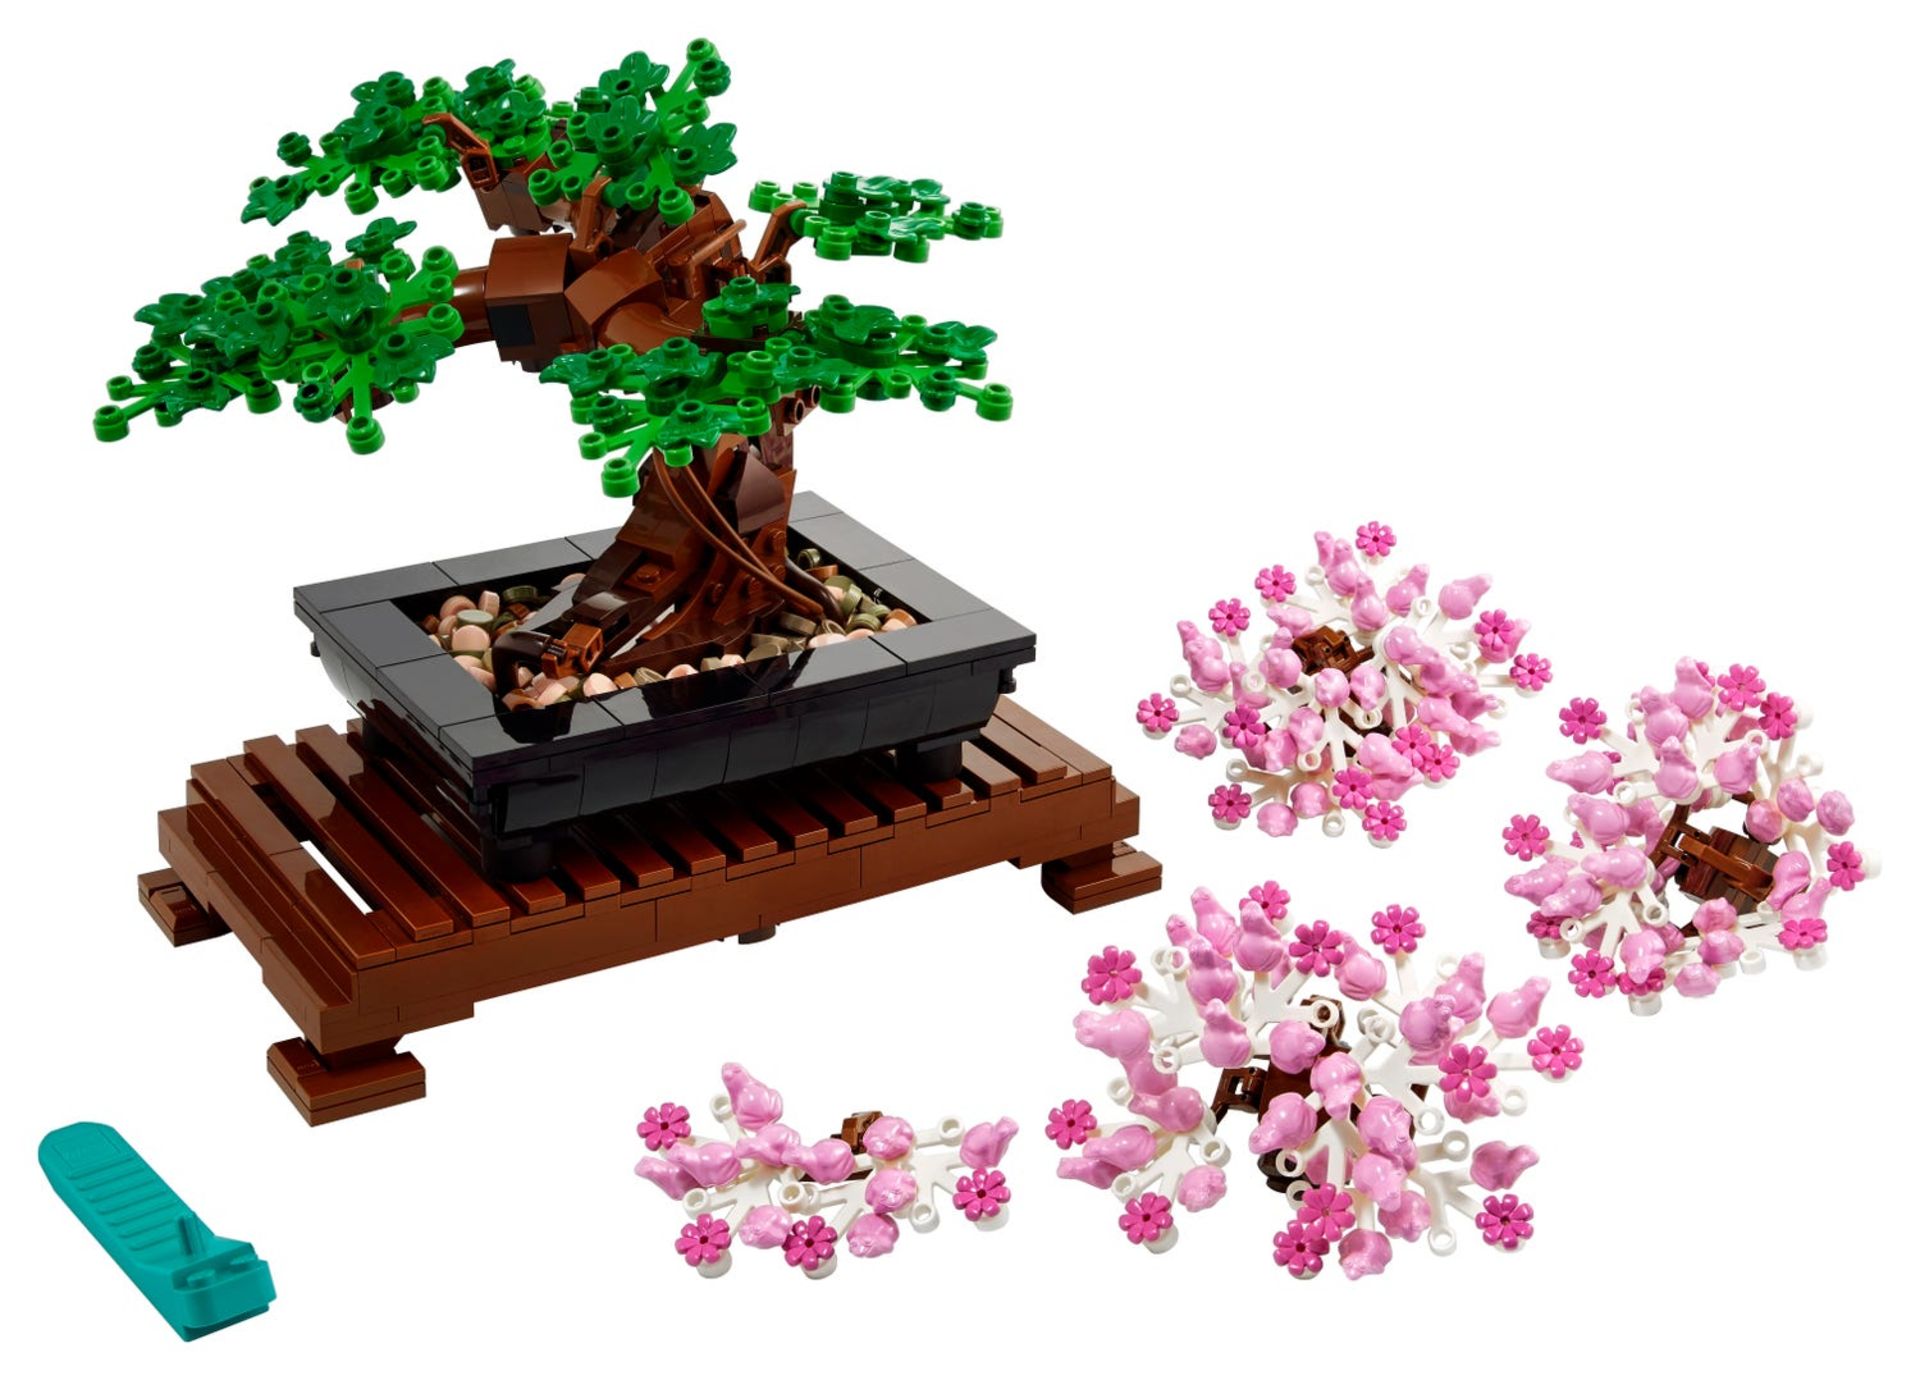 1 x Lego Botanical Collection Bonsai Tree 878 Pieces 18+ (10281) - Brand New - CL987 - Ref: - Image 3 of 5